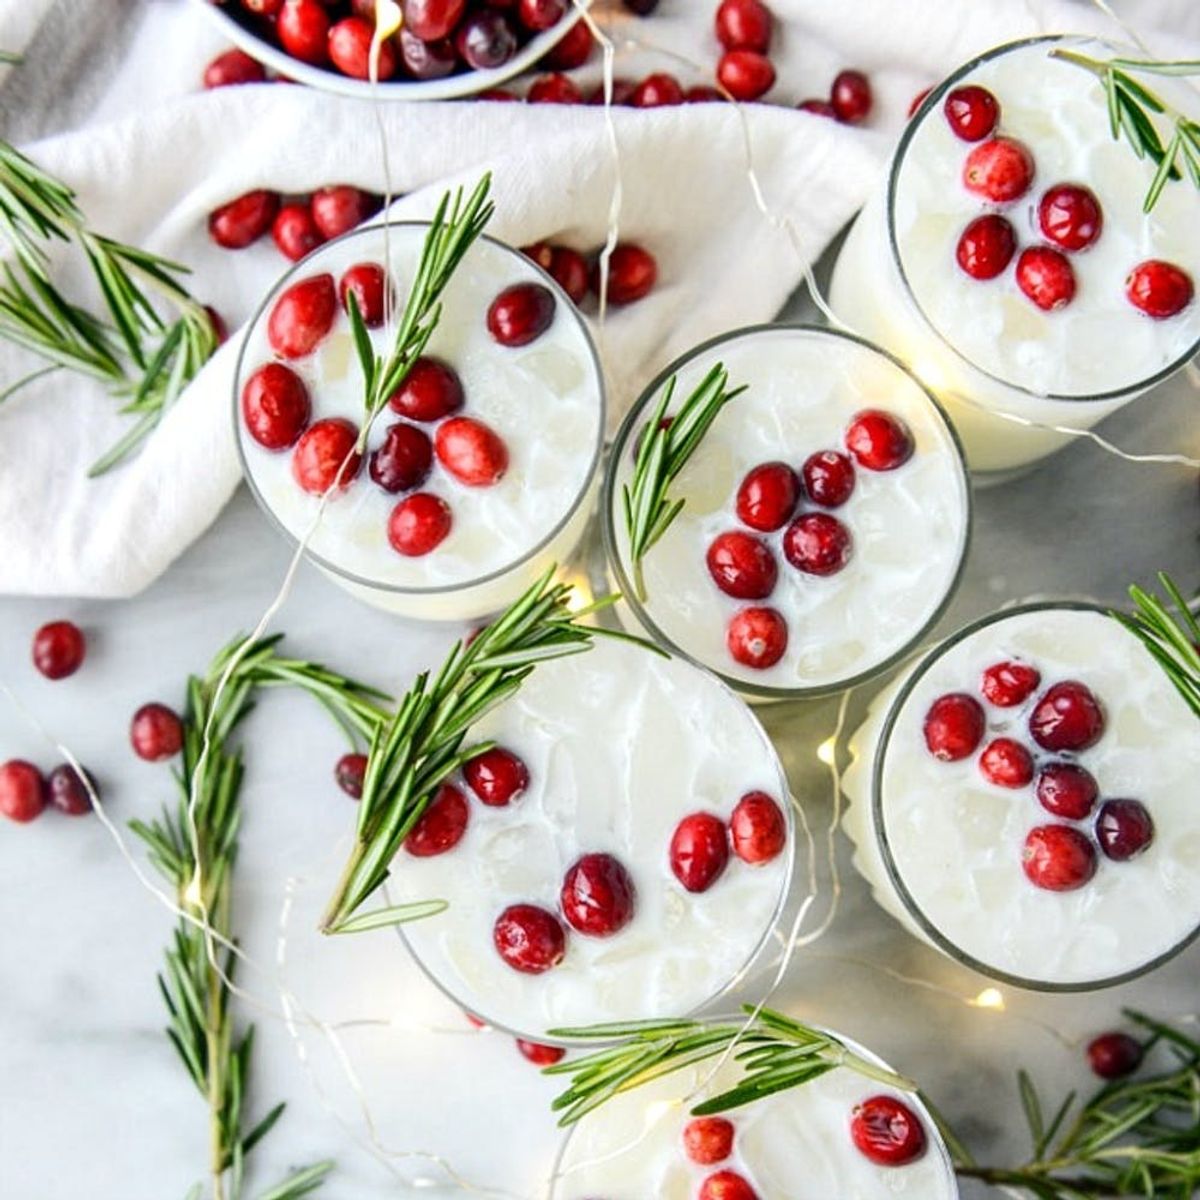 12 Festive Punches That Will Slay This Holiday Season